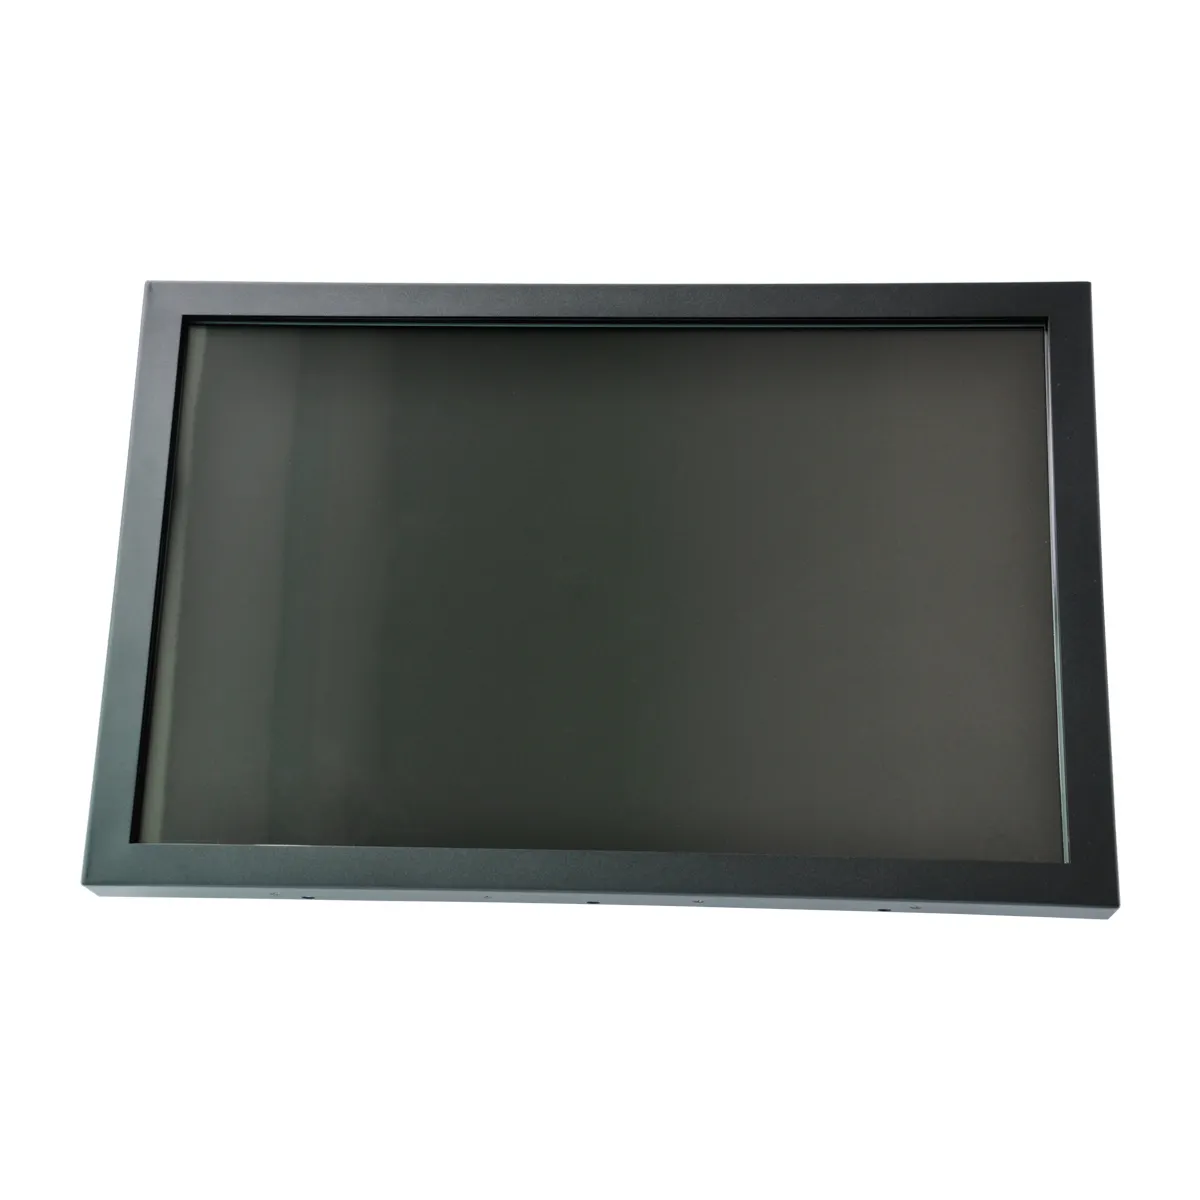 22 inch ultra slim full hd 1080p infrared touch screen monitor wall mount